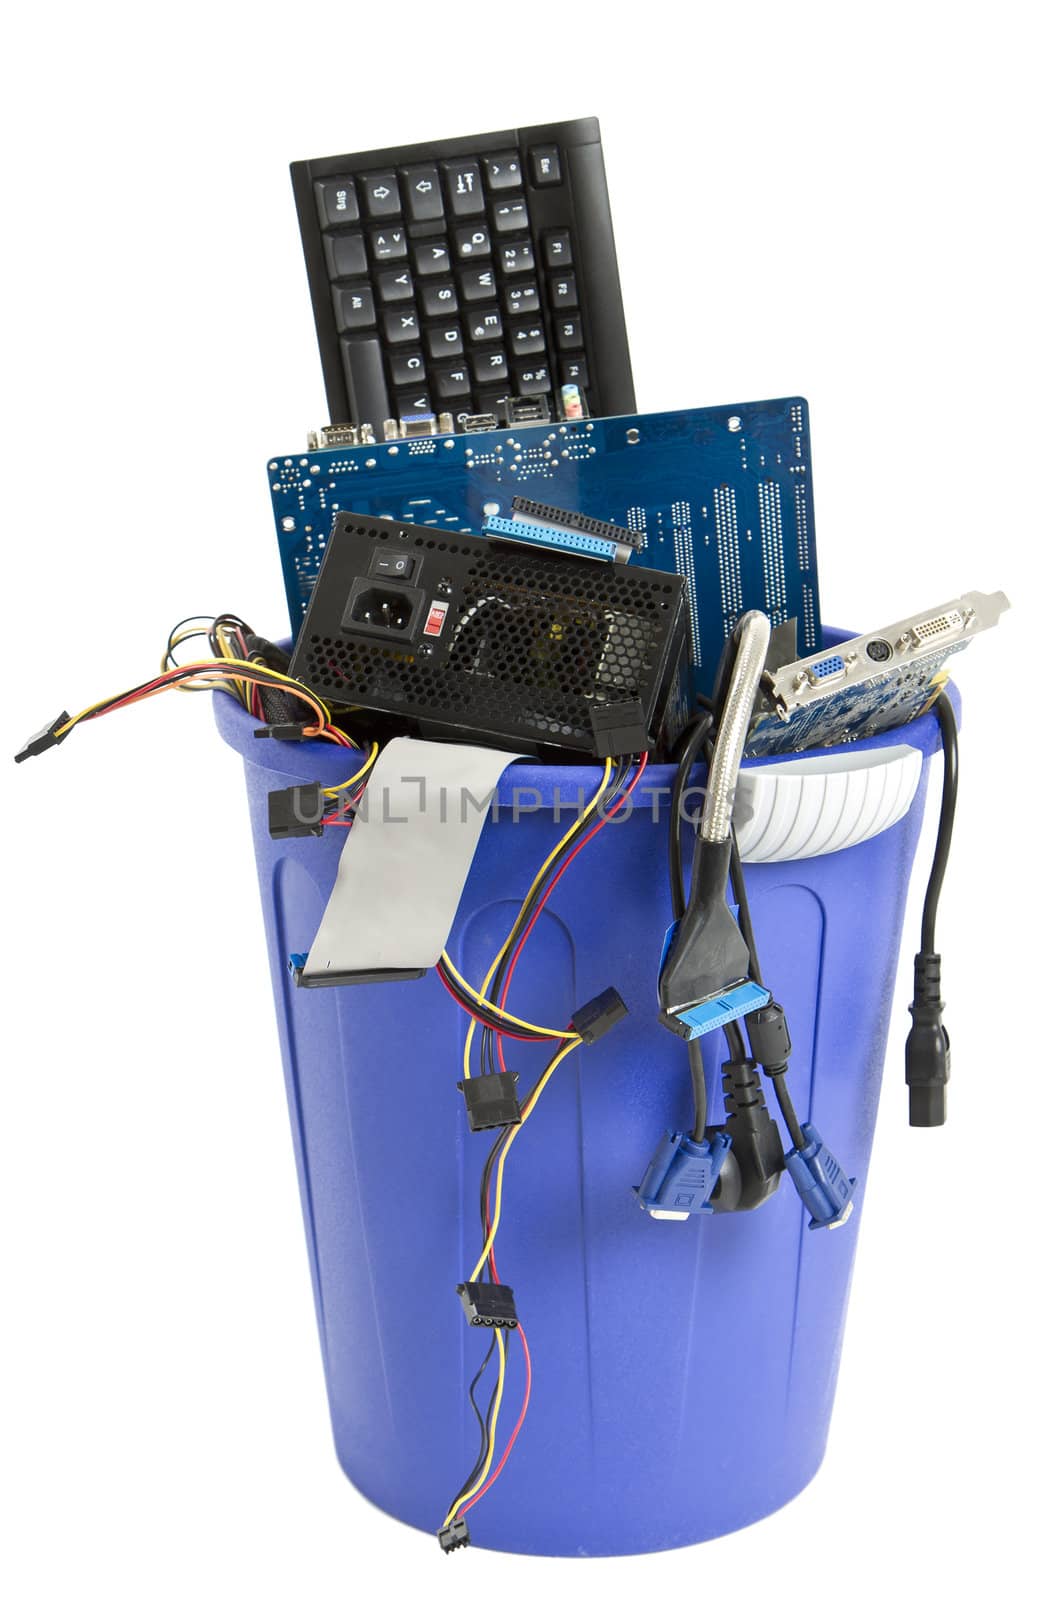 electronic scrap in trash can. keyboard, cables, logicbaord, power supply